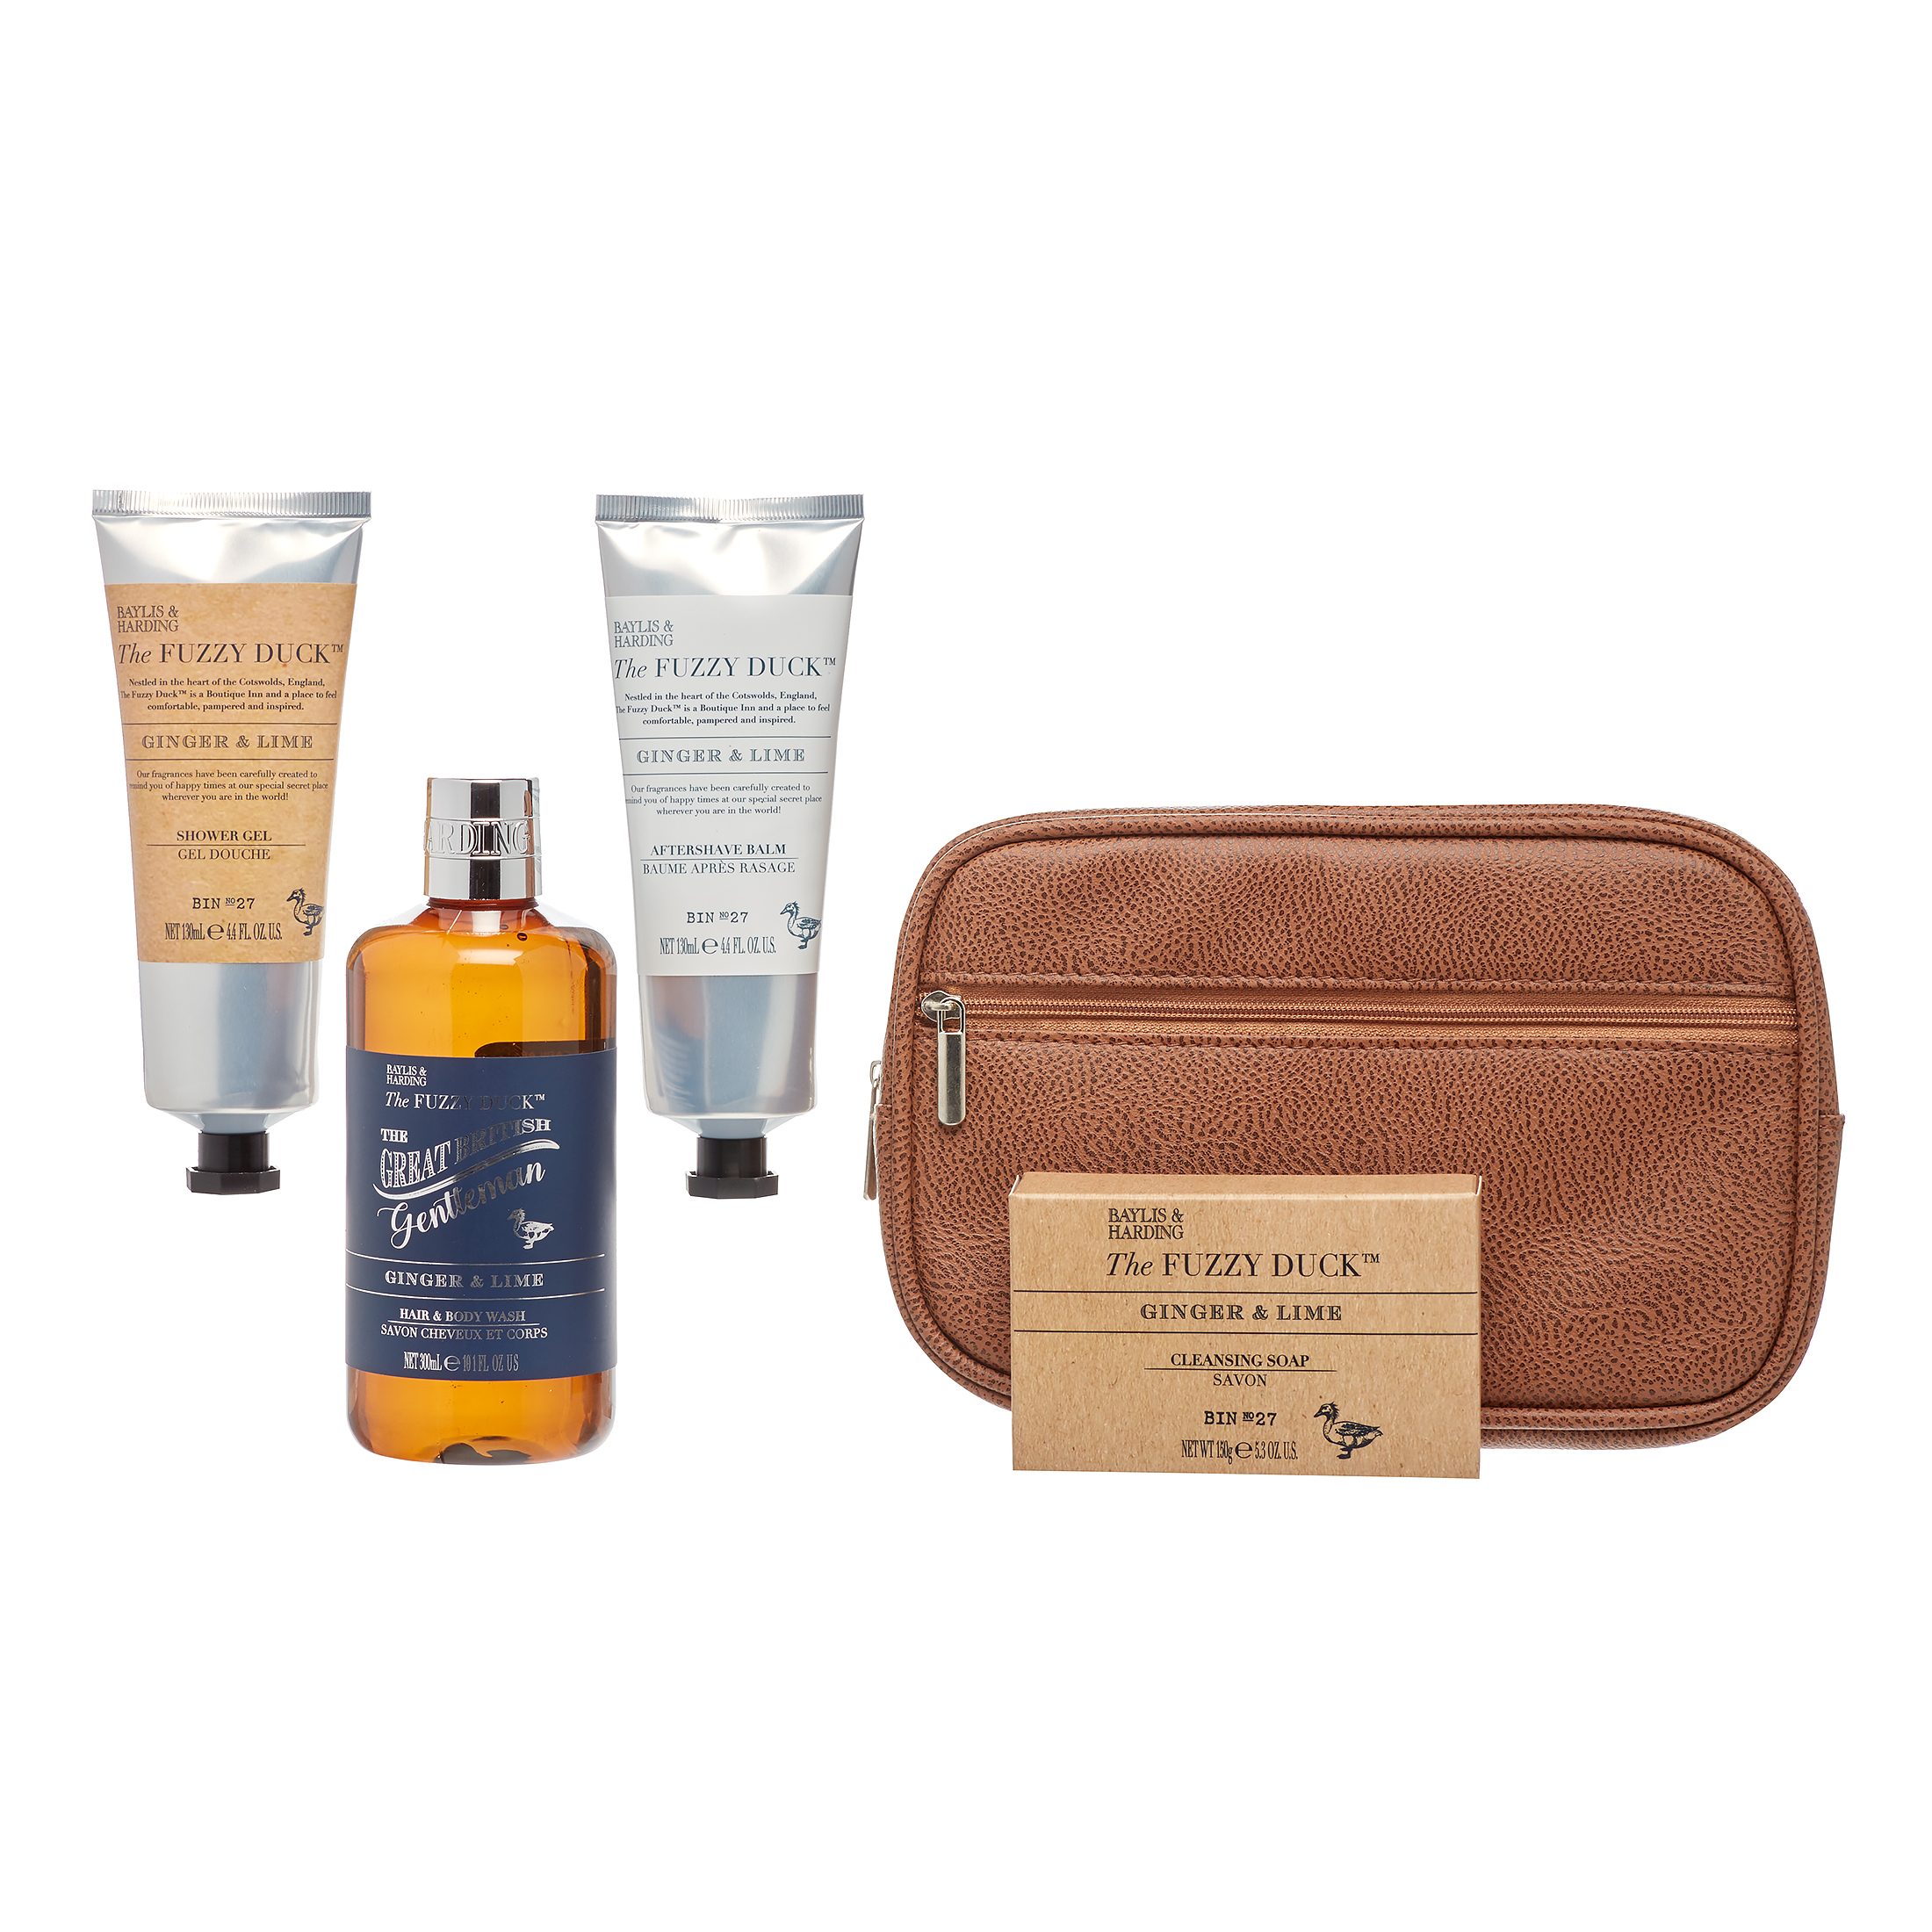 Baylis & Harding The Fuzzy Duck Ginger and Lime Collection Great British Gentlemen Overnight Kit Gift Set for Men - image 2 of 7